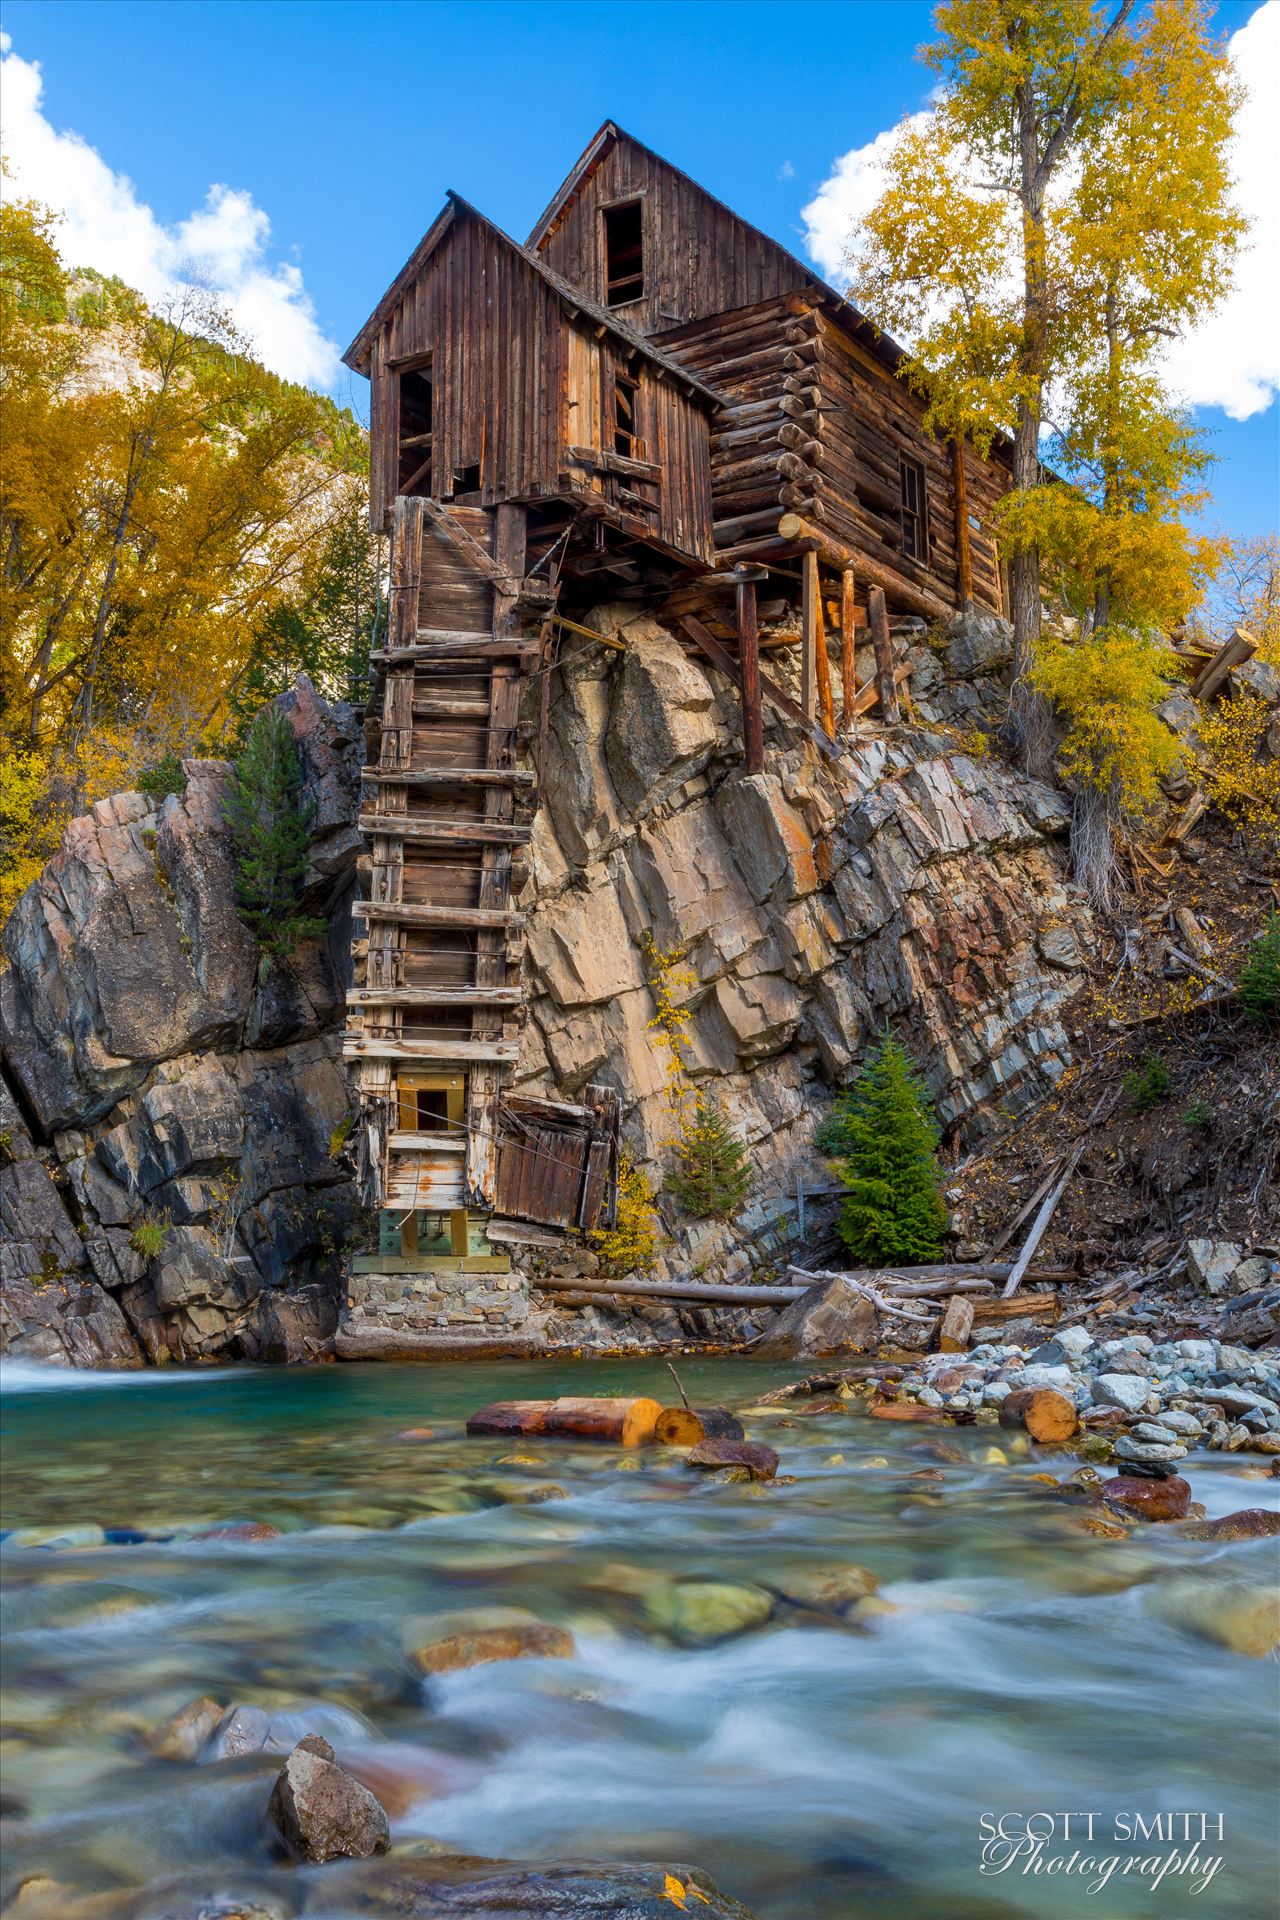 Crystal Mill, Colorado 09 The Crystal Mill, or the Old Mill is an 1892 wooden powerhouse located on an outcrop above the Crystal River in Crystal, Colorado by Scott Smith Photos